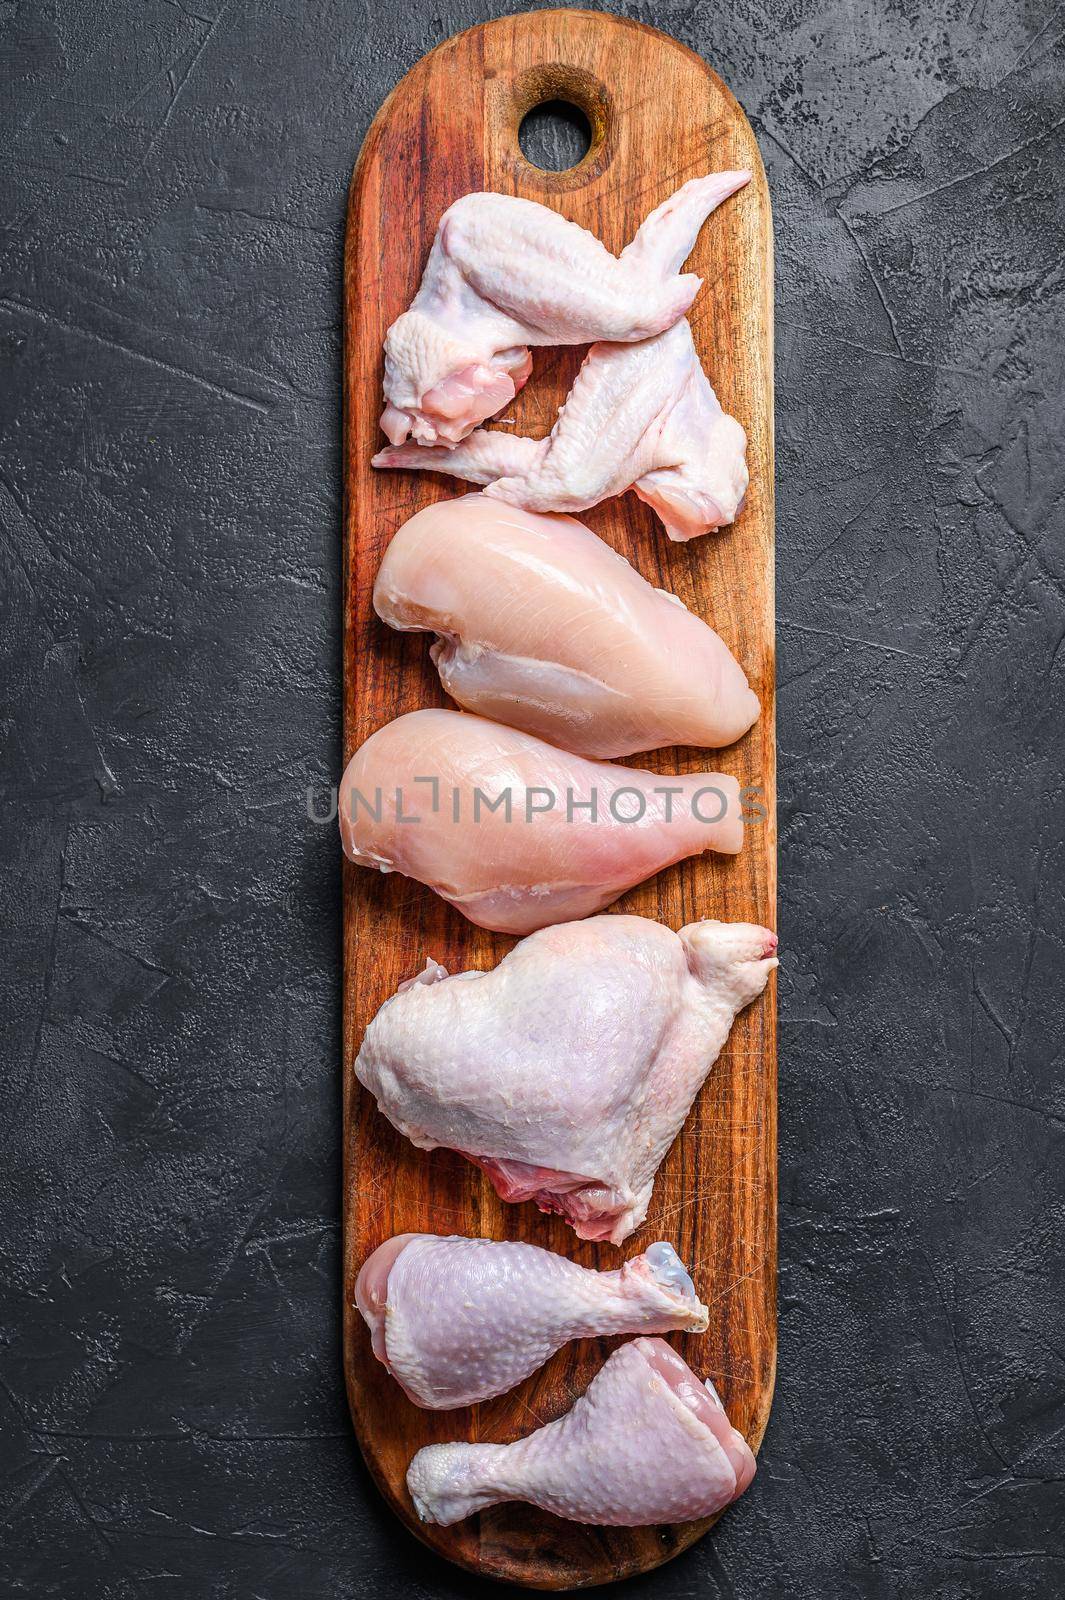 Different types of raw chicken meat, poultry. Black background. Top view.